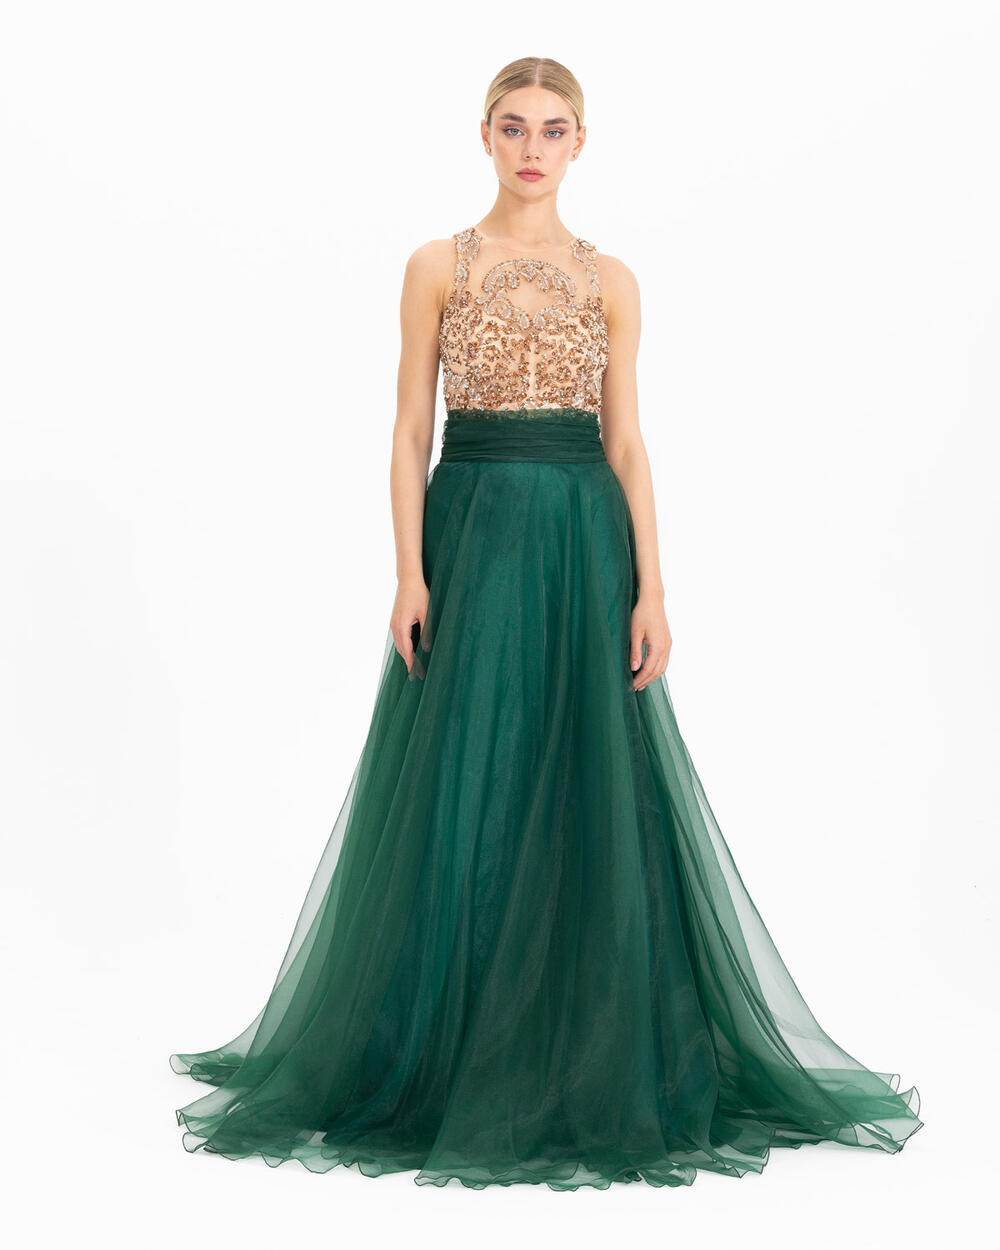 Tulle Evening Dress with Indian Accessories